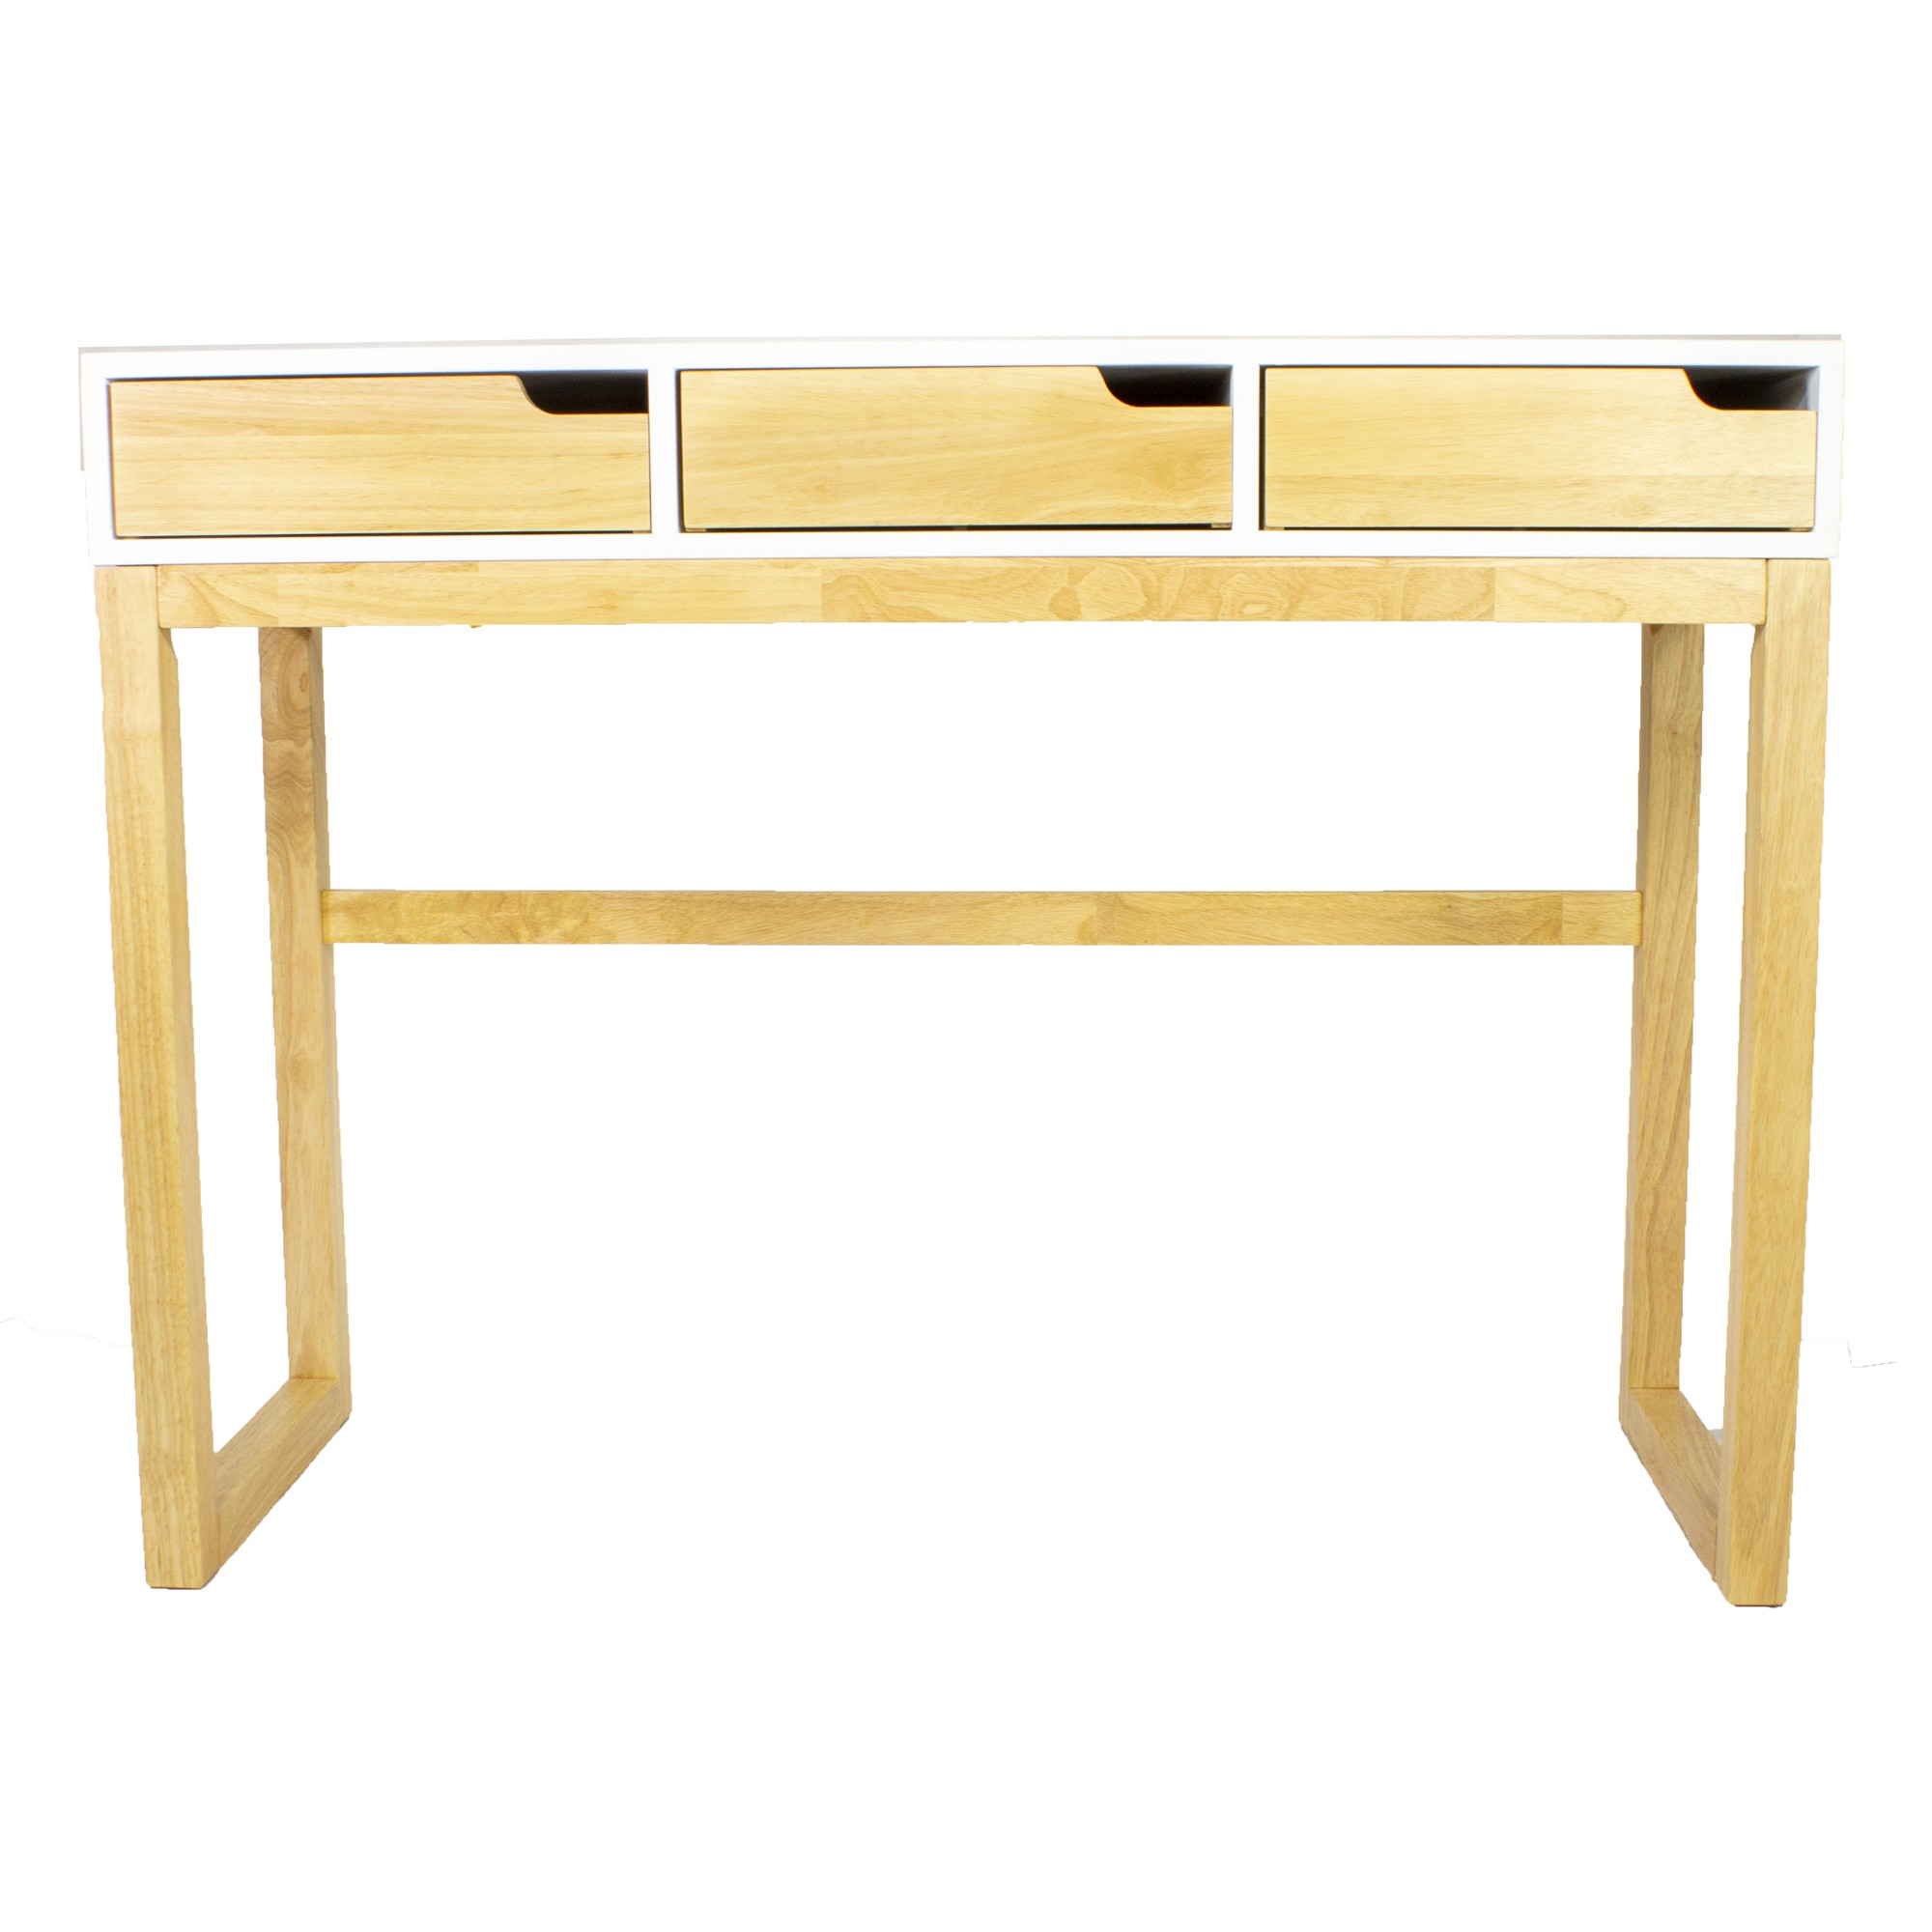 43" X 16" X 32" White & Natural Solid Wood Three Drawer Console Table